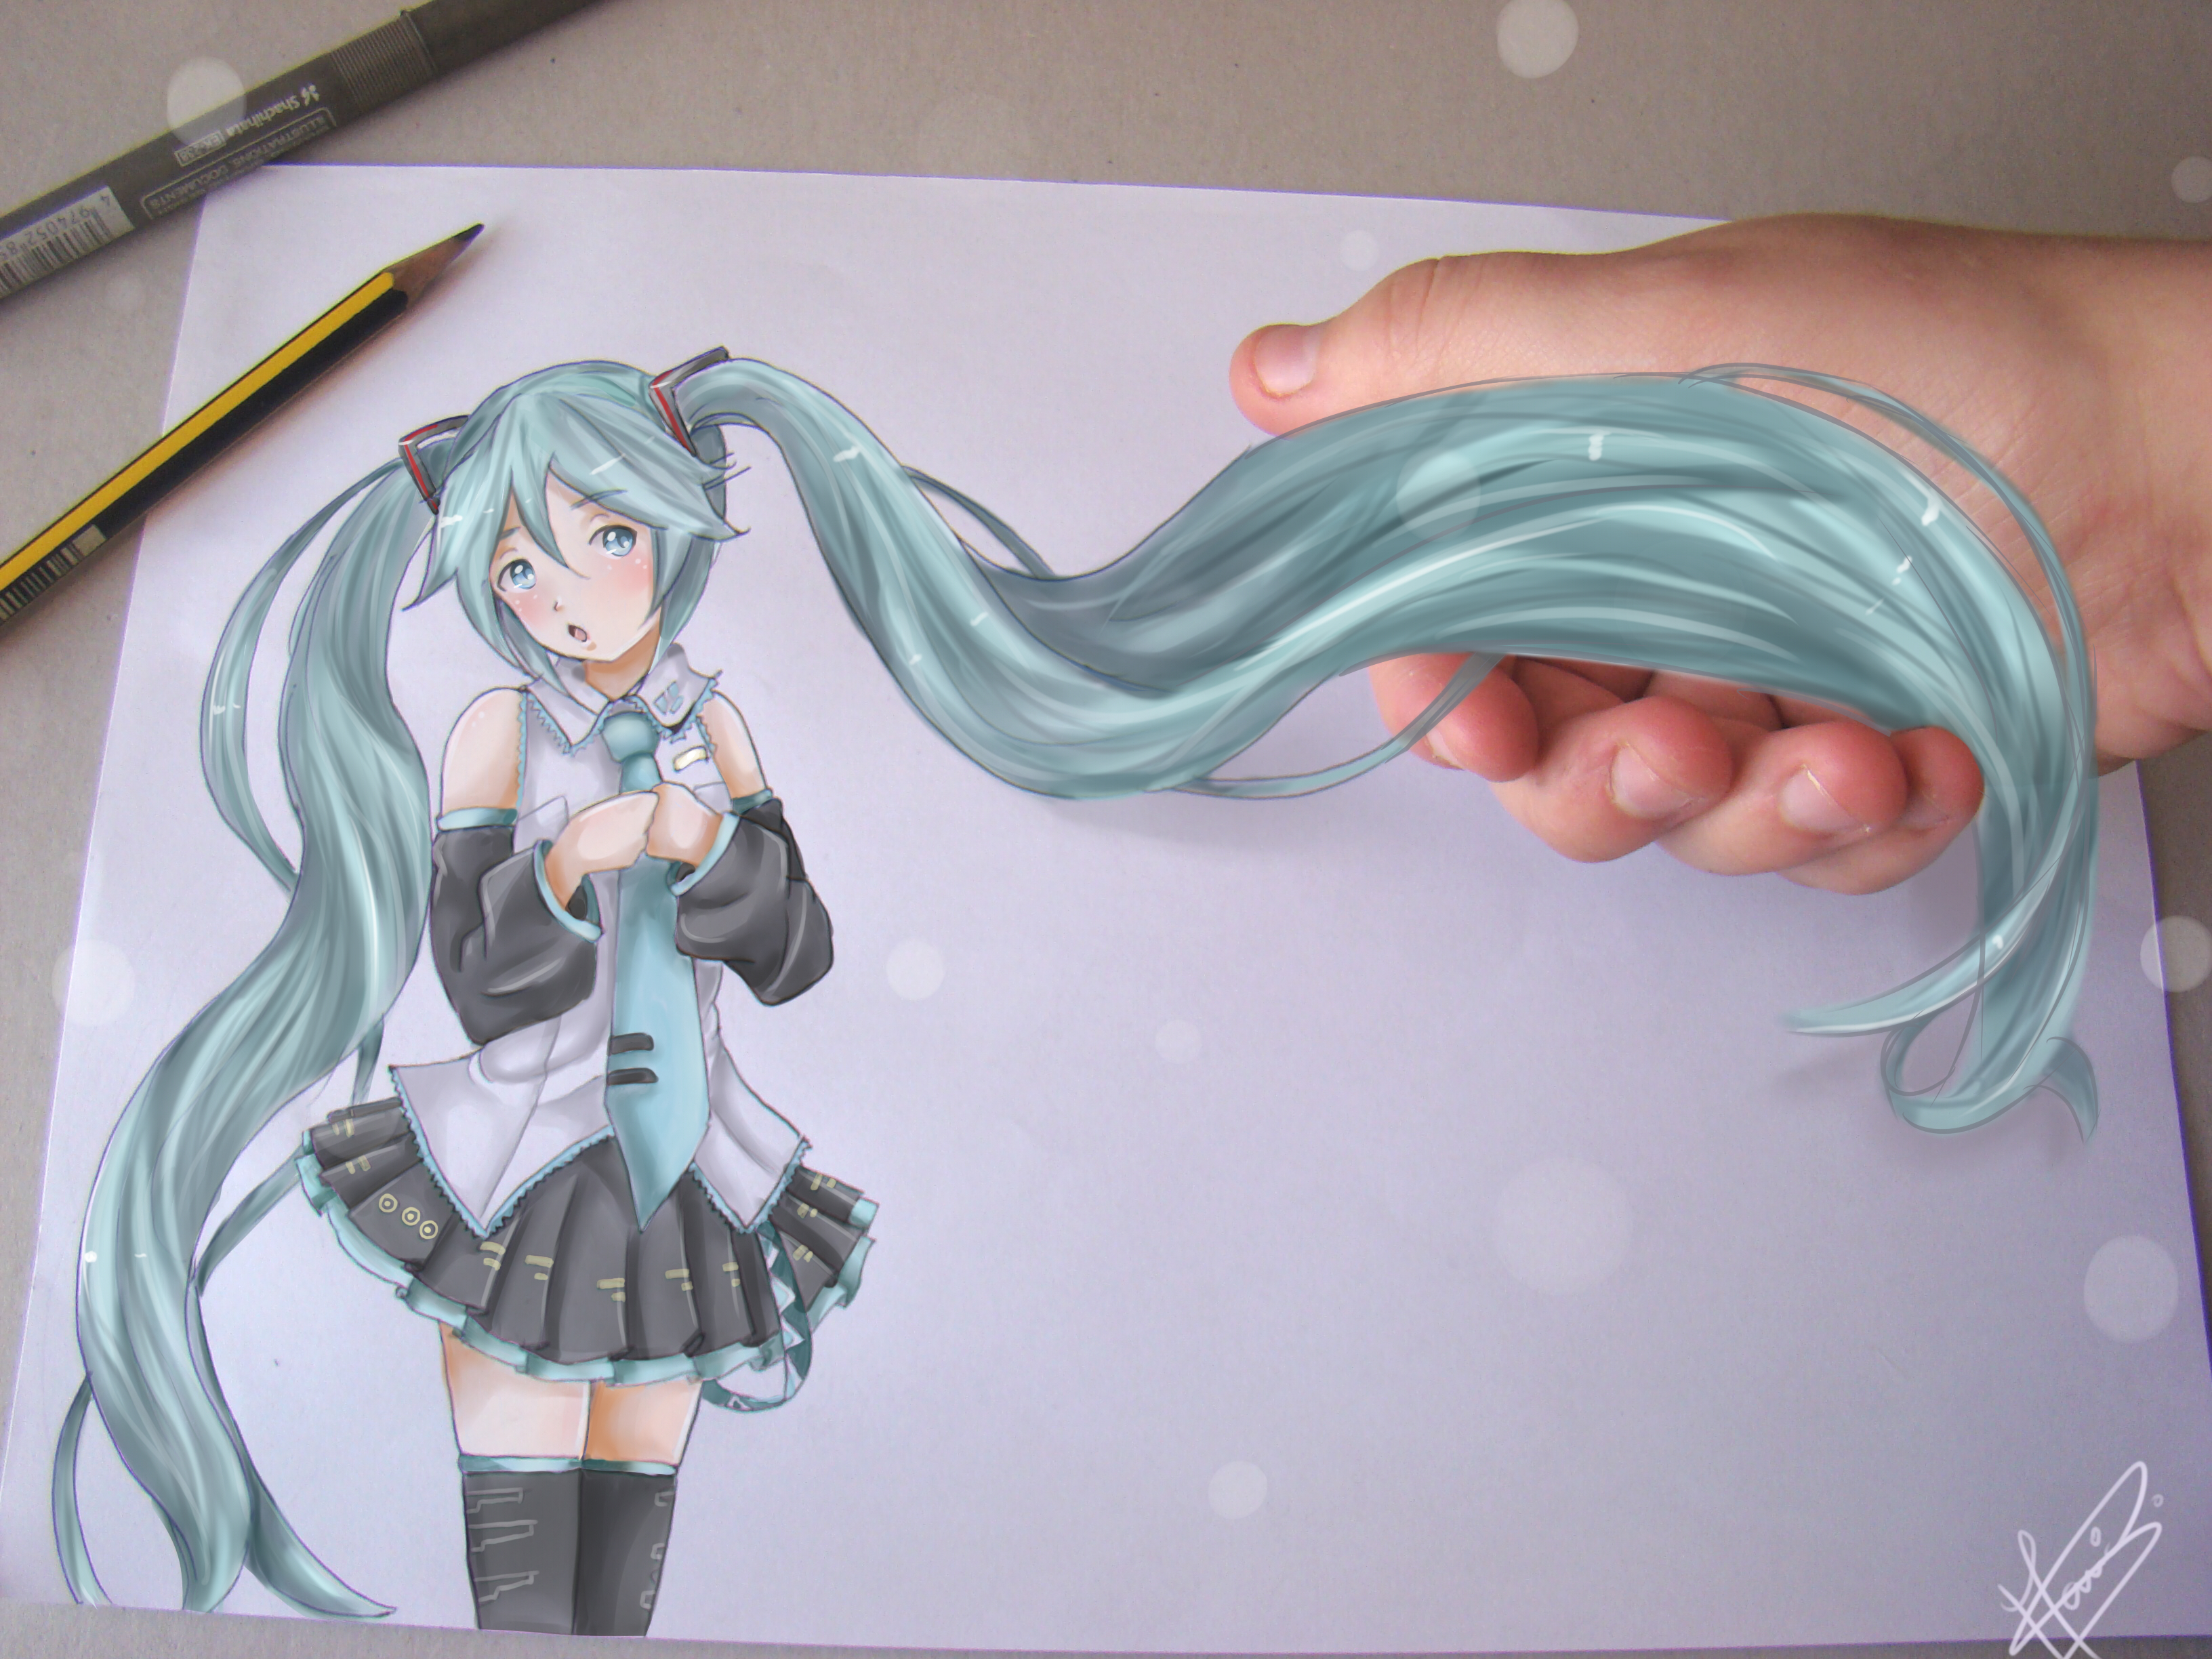 Anime mix with real Life : Hatsune Miku by maria-sl on DeviantArt